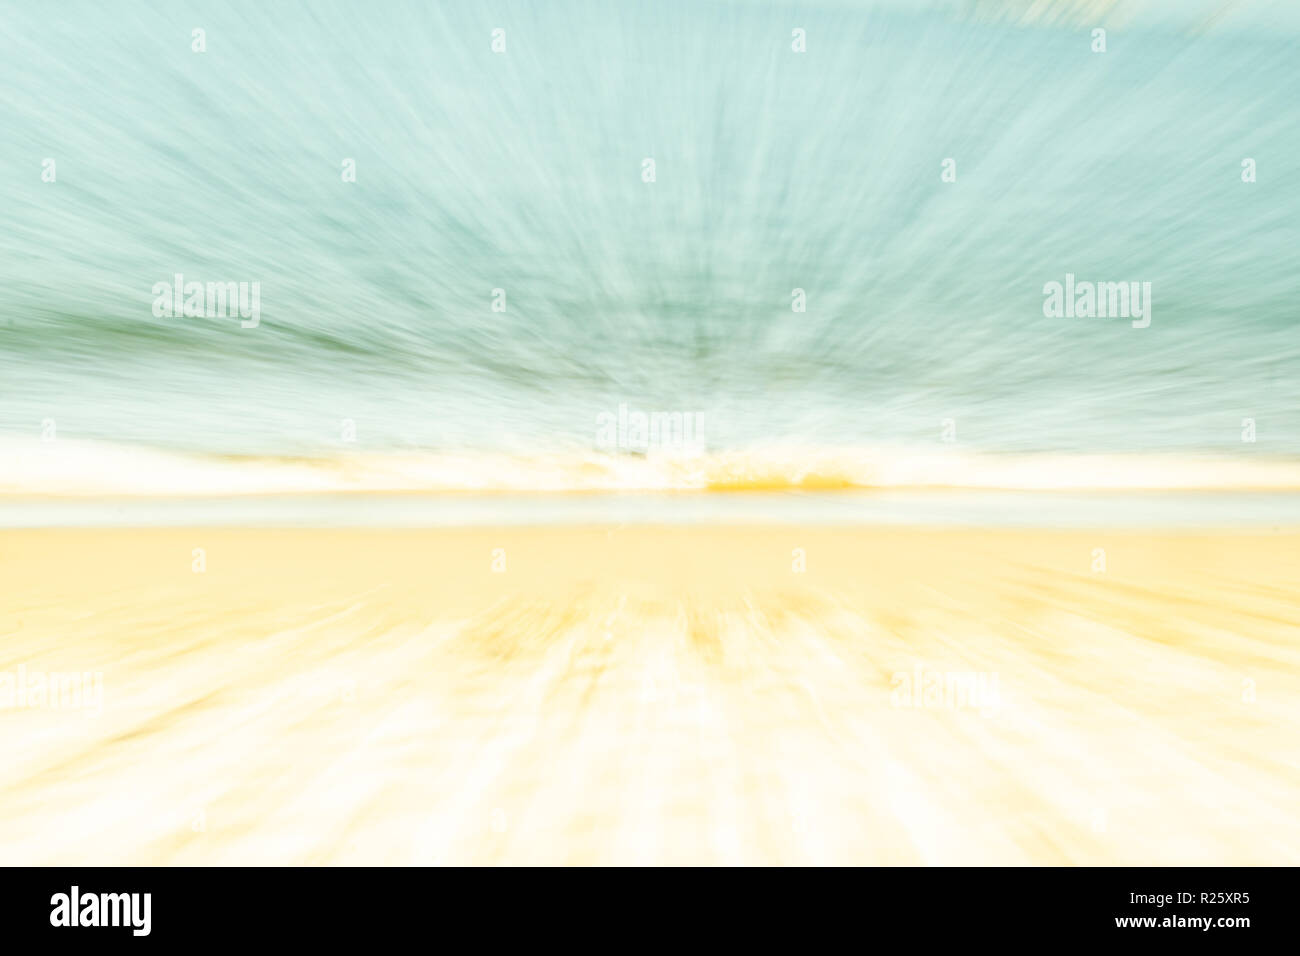 Backgrounds soft hues coastal abstract golden sand blue water and pale sky in zoom blur Stock Photo